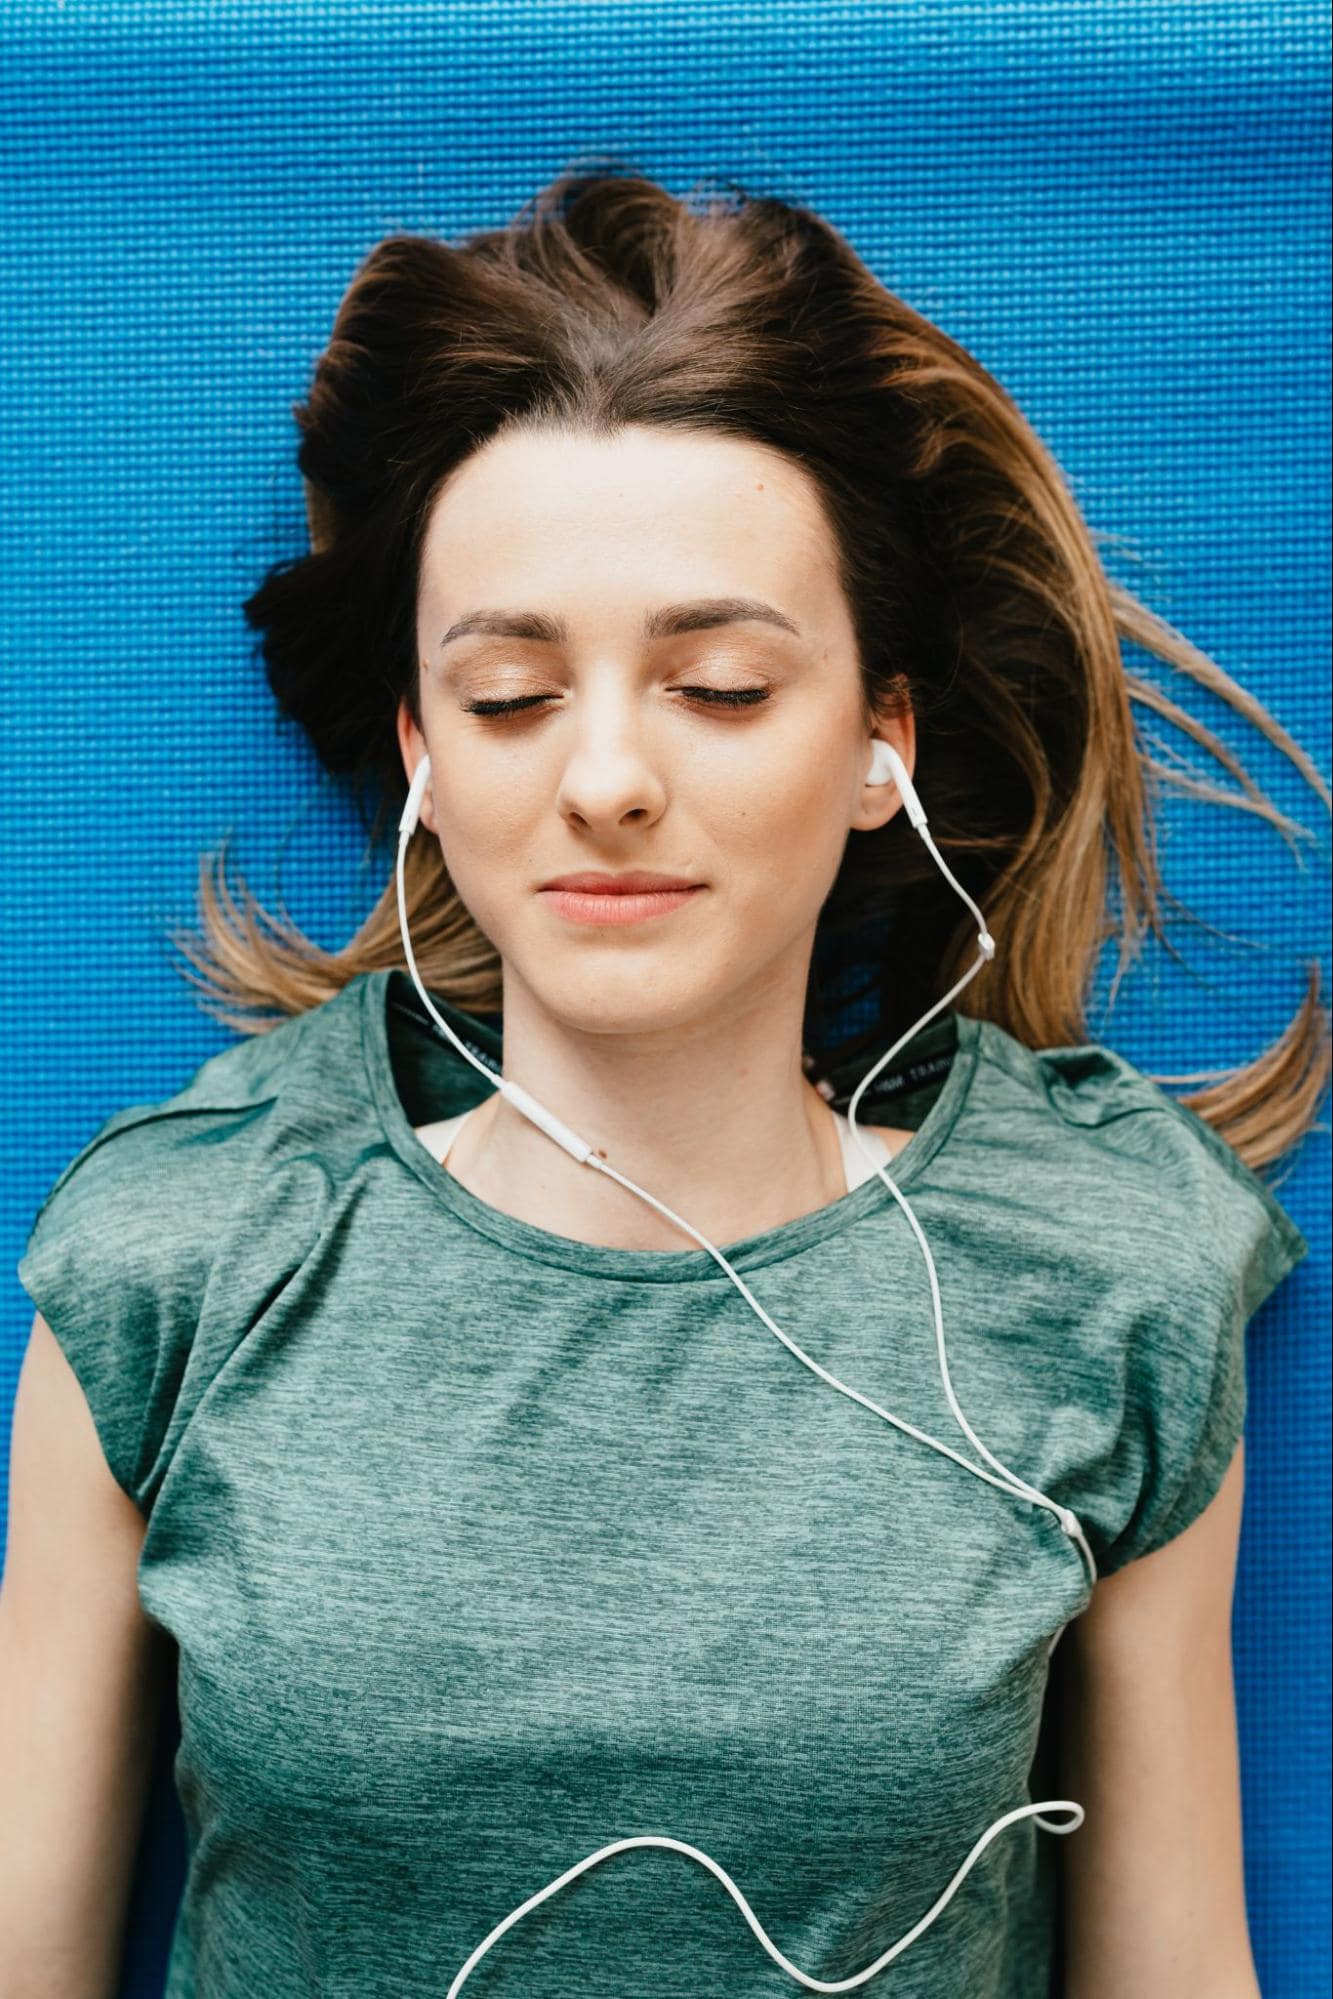 Person meditating with earbuds in